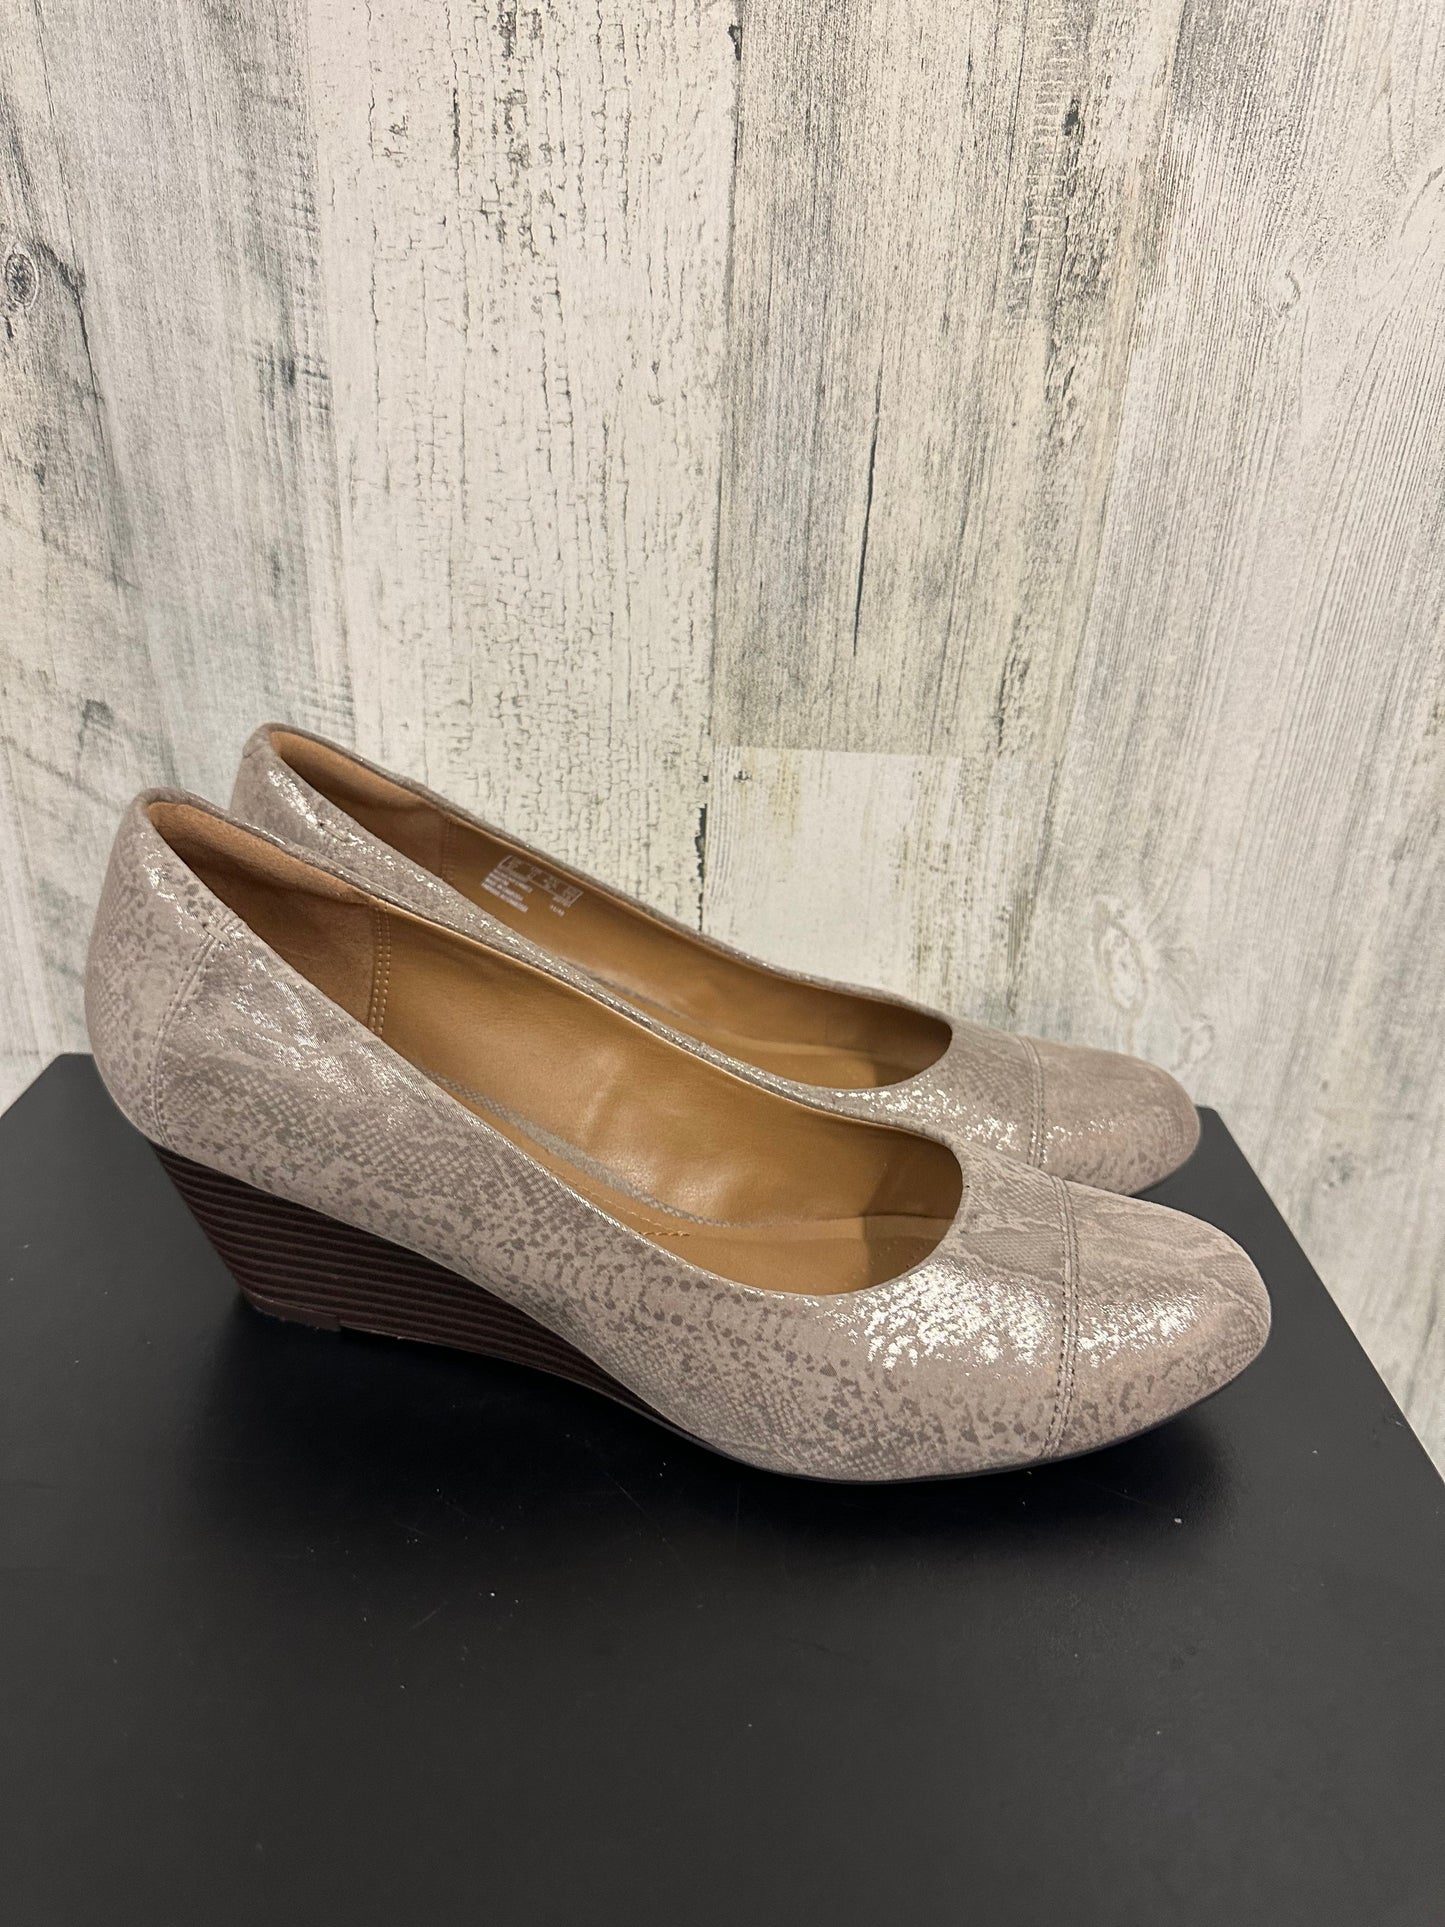 Shoes Heels Wedge By Clarks  Size: 11